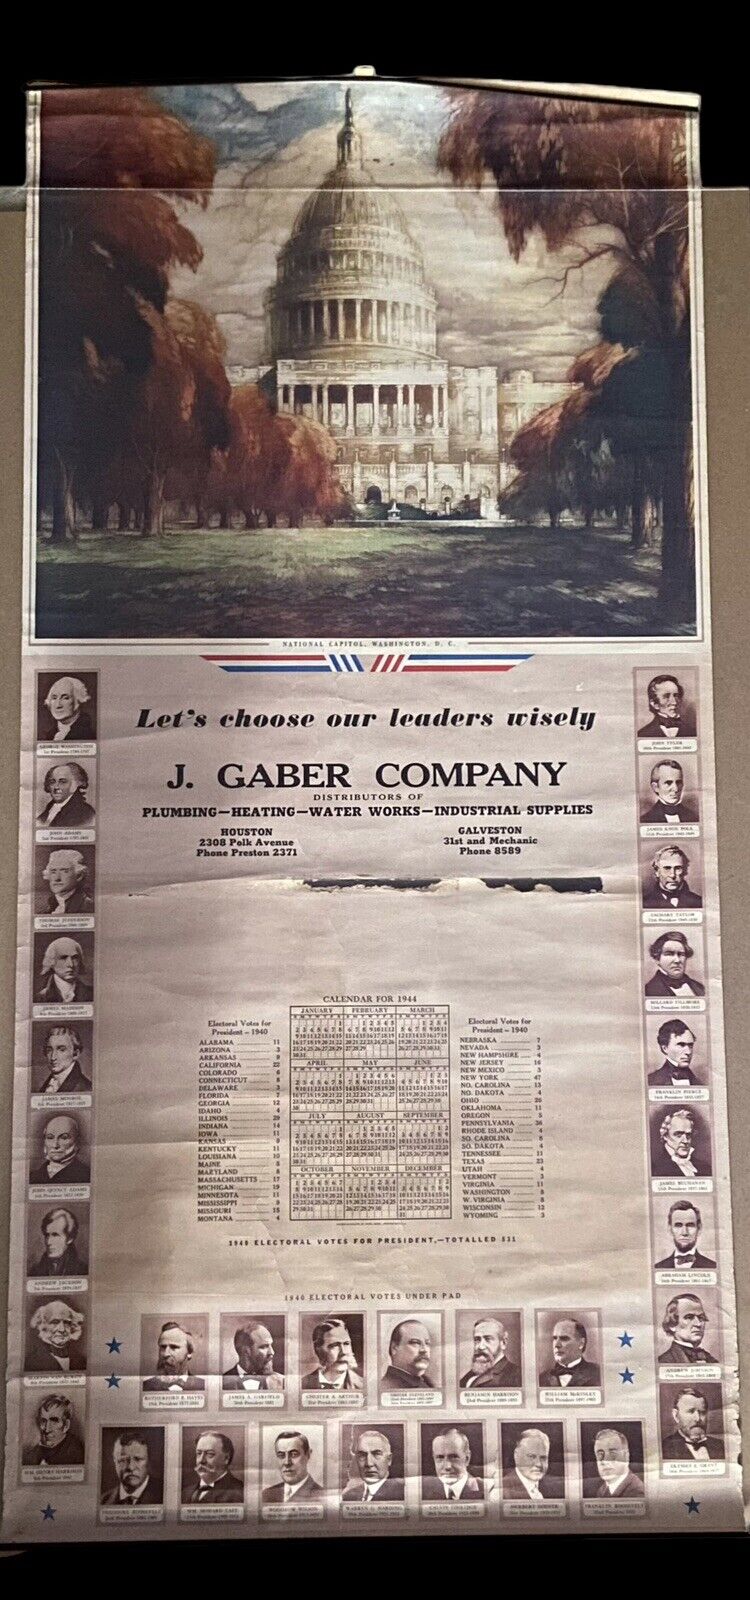 1944 Political Advertising Calendar Print CHOOSE OUR LEADERS WISELY J. Gaber Co.